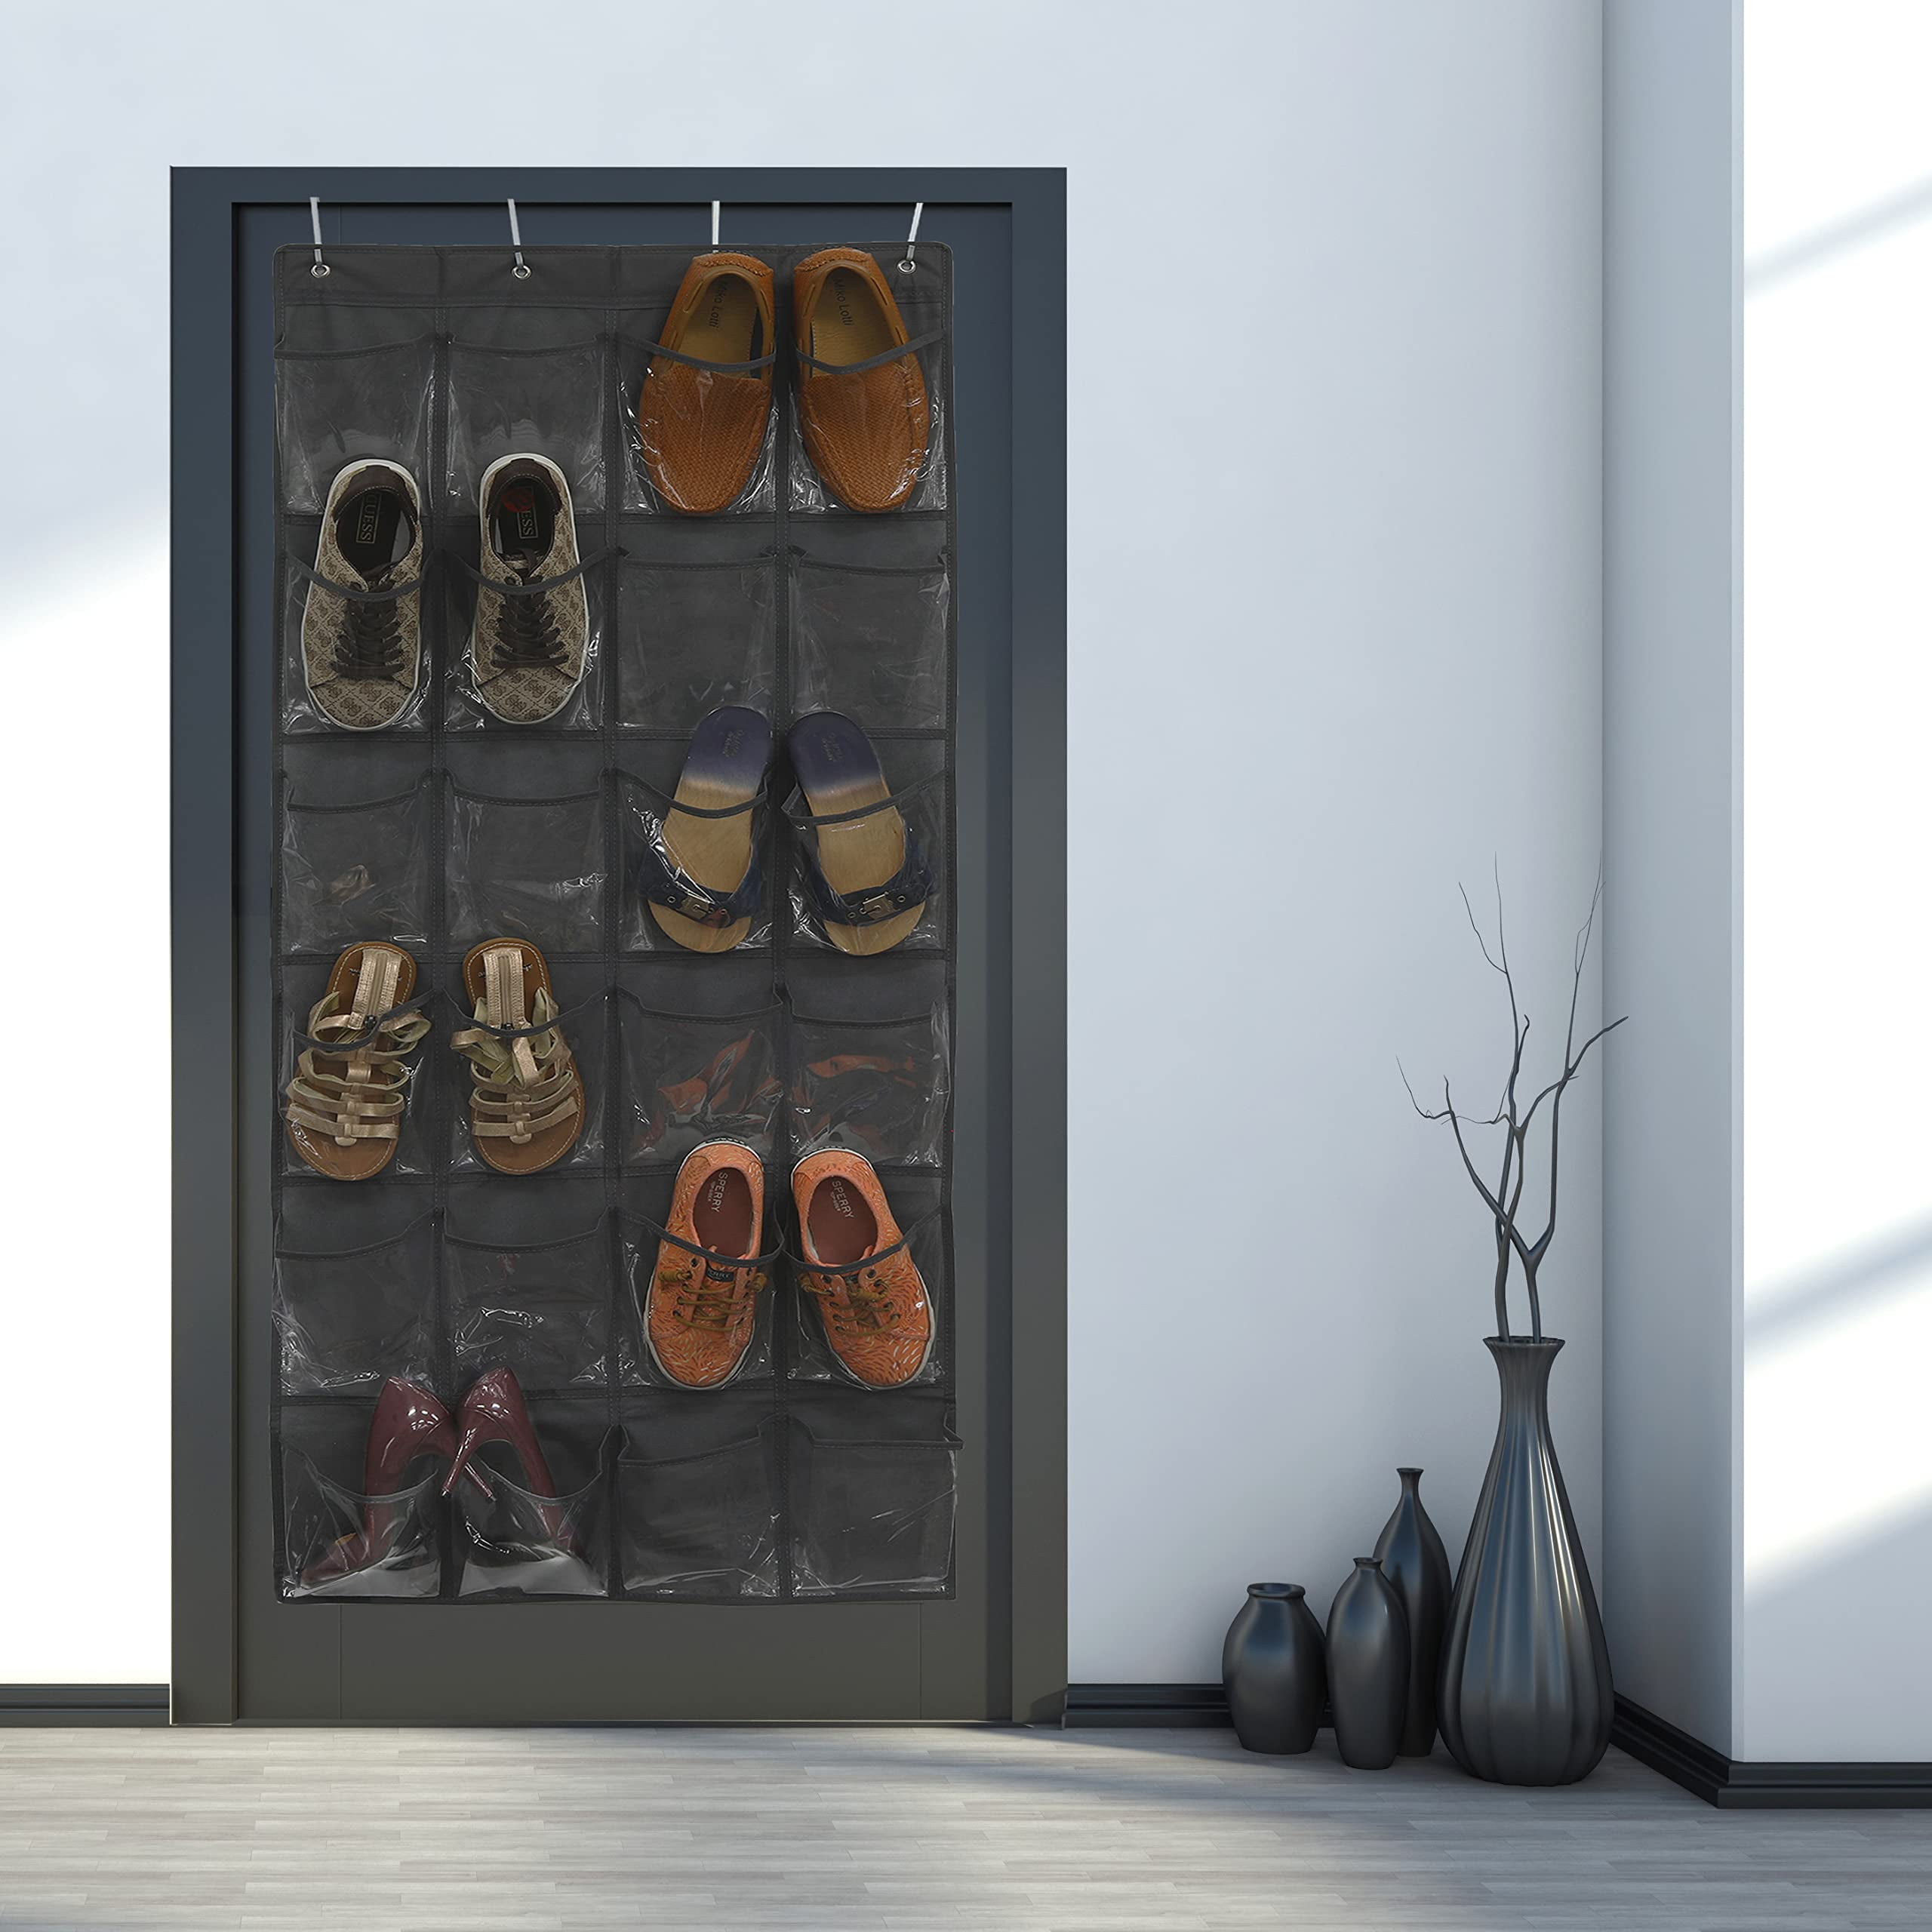 24 Pockets - SimpleHouseware Crystal Clear Over The Door Hanging Shoe  Organizer, Gray (64'' x 19'')